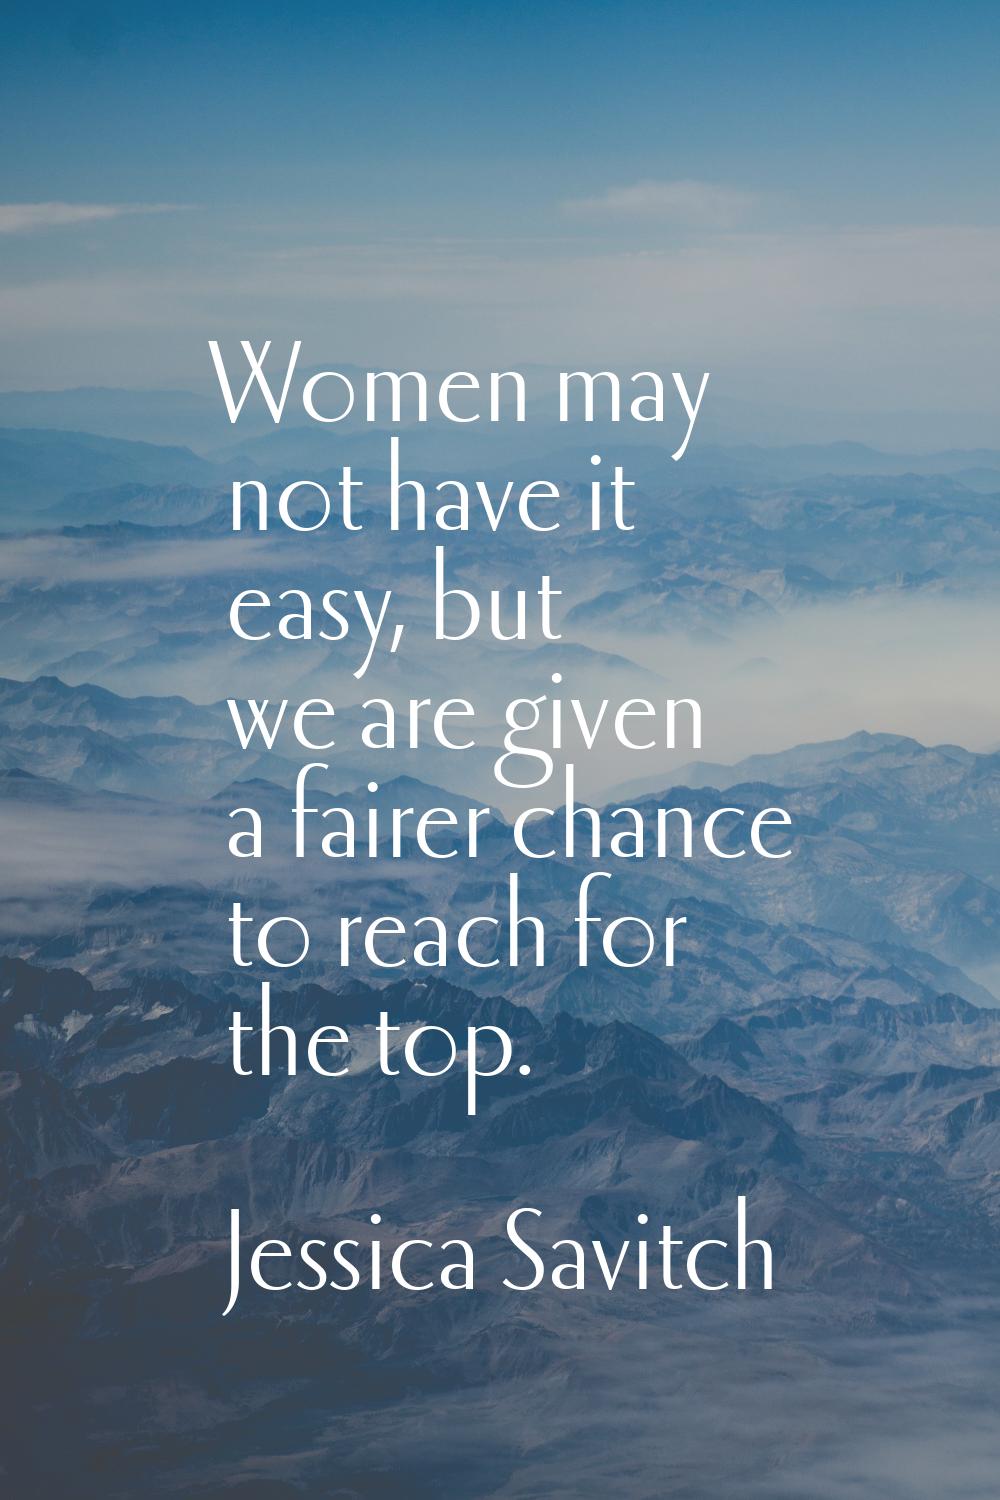 Women may not have it easy, but we are given a fairer chance to reach for the top.